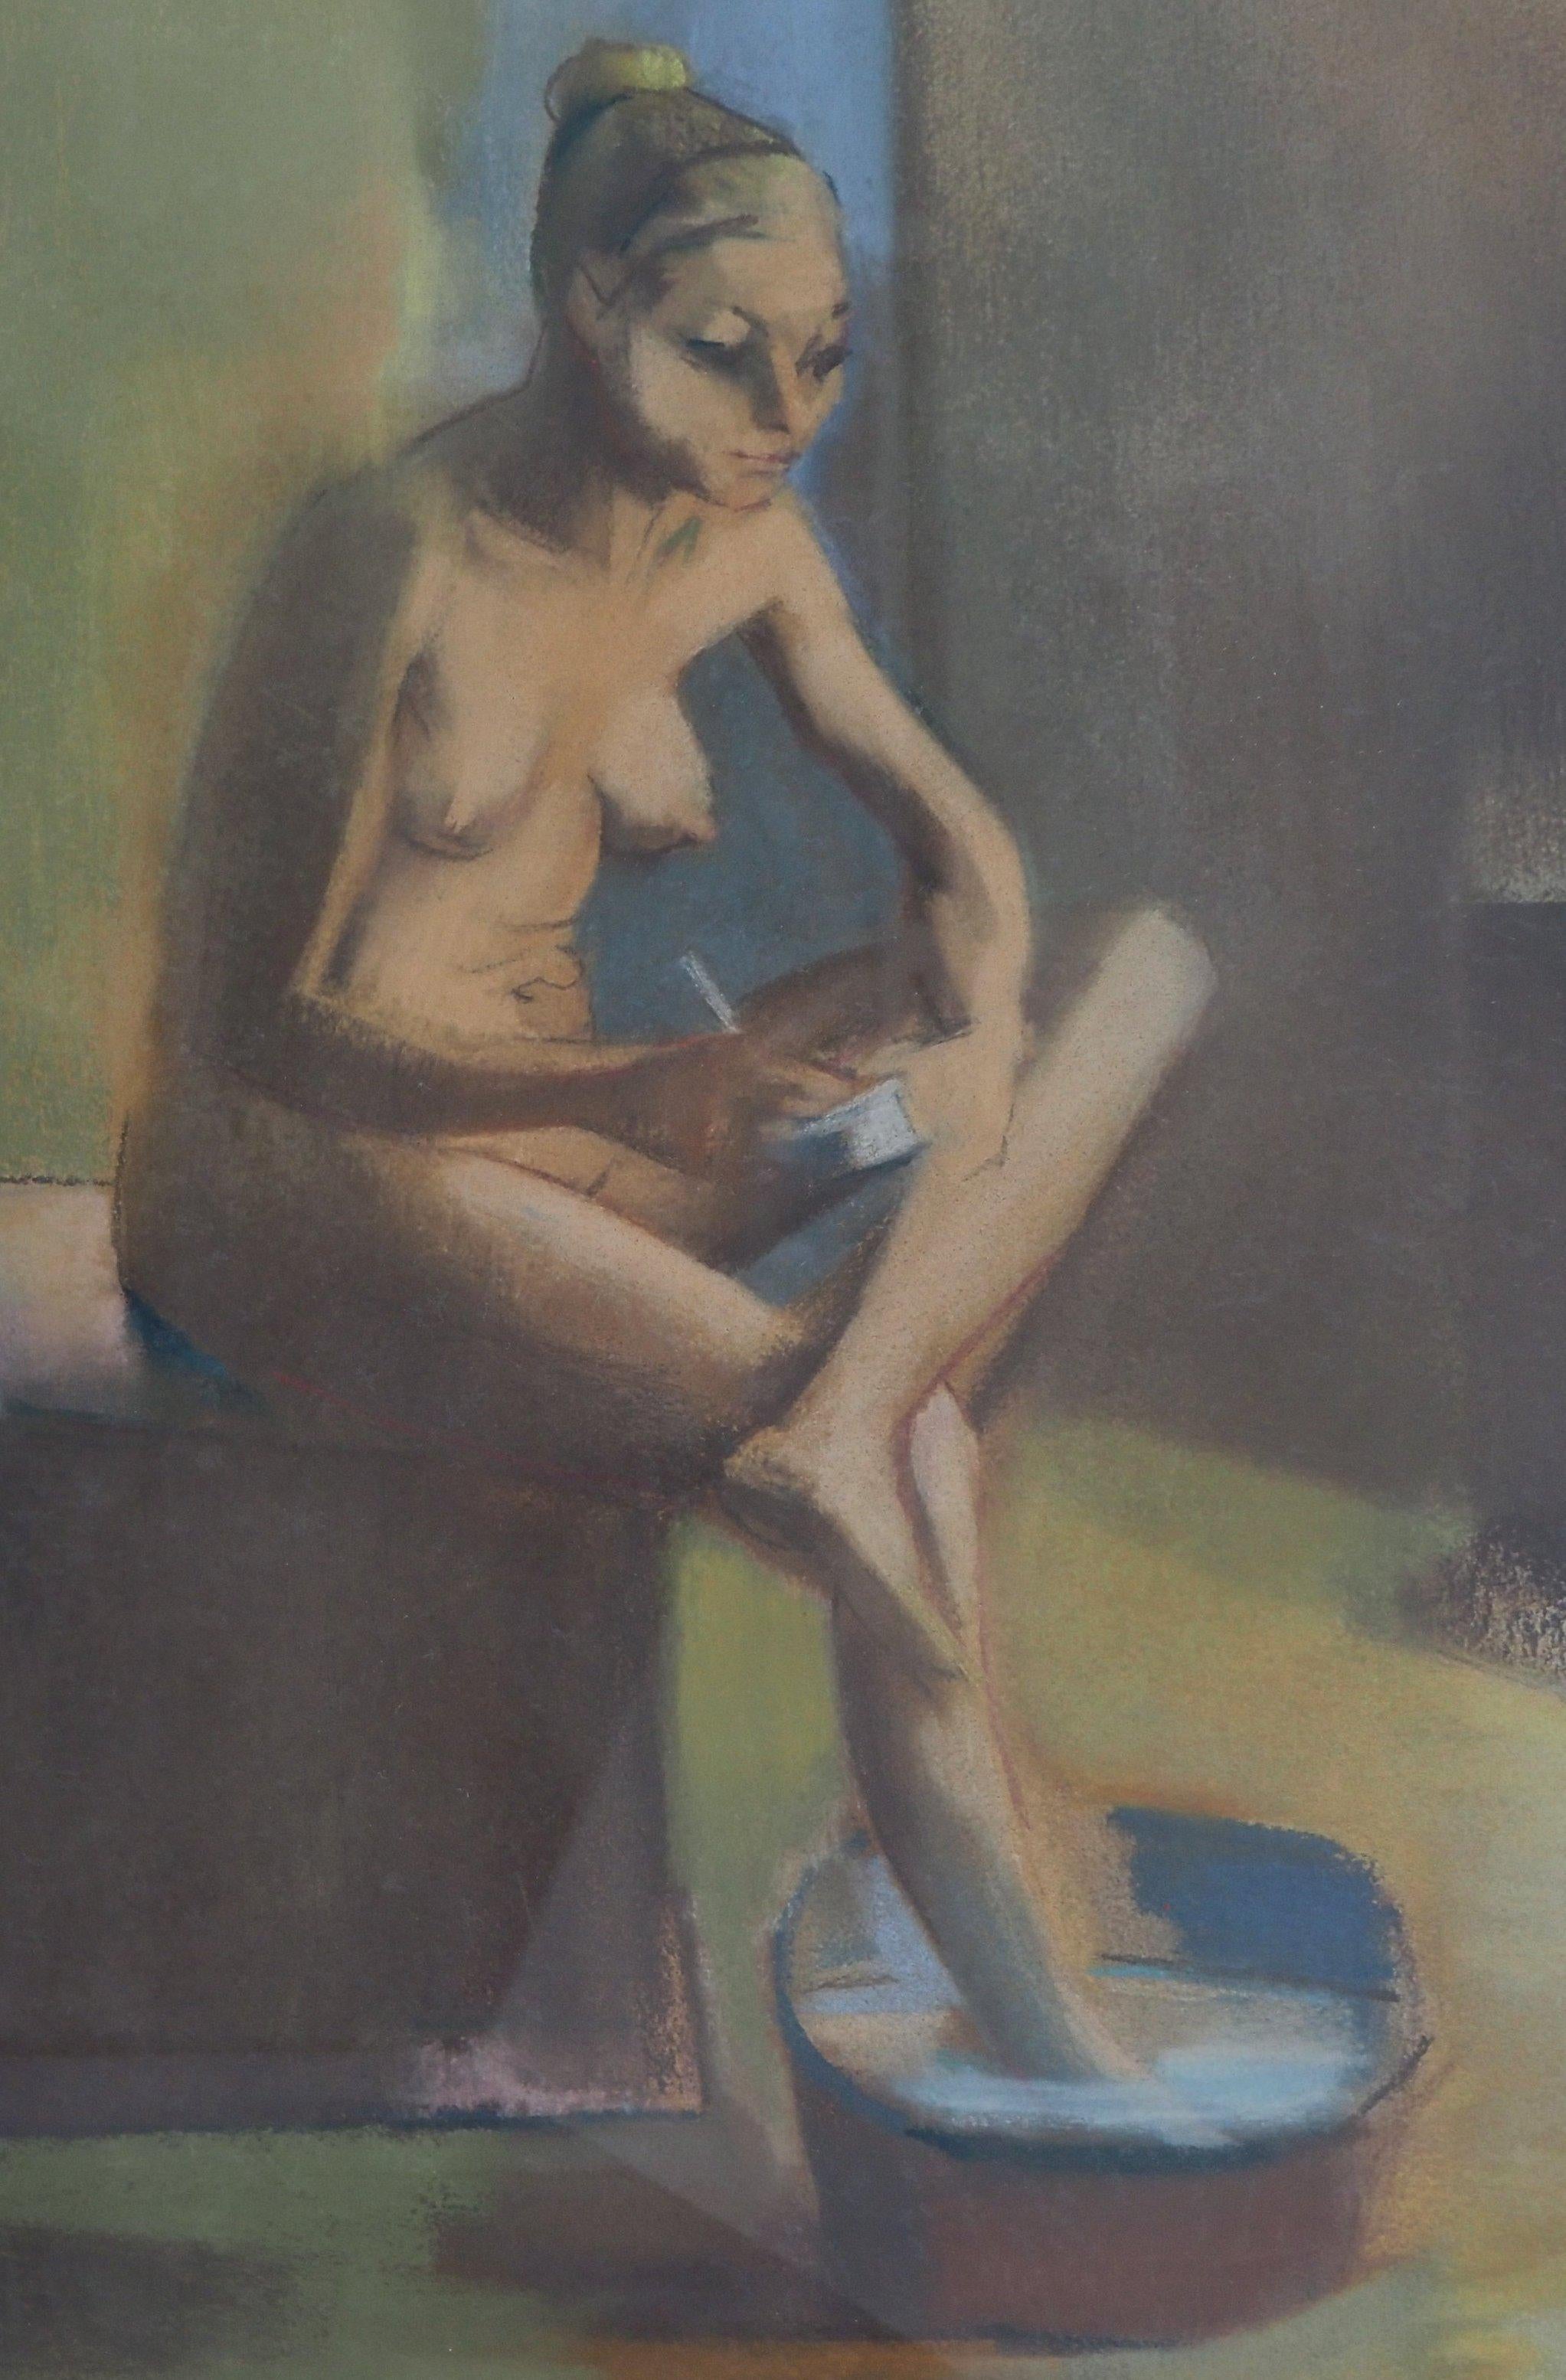 Françoise GILOT (1921-)
Woman in the Hammam 

Original Pastel Drawing
Signed bottom right
On paper 74 x 55 cm at view (c. 30 x 22 in)
Presented in golden wood frame 96 x 77 cm (c. 38 x 31 in)

REFERENCE : This artwork is referenced in Francoise